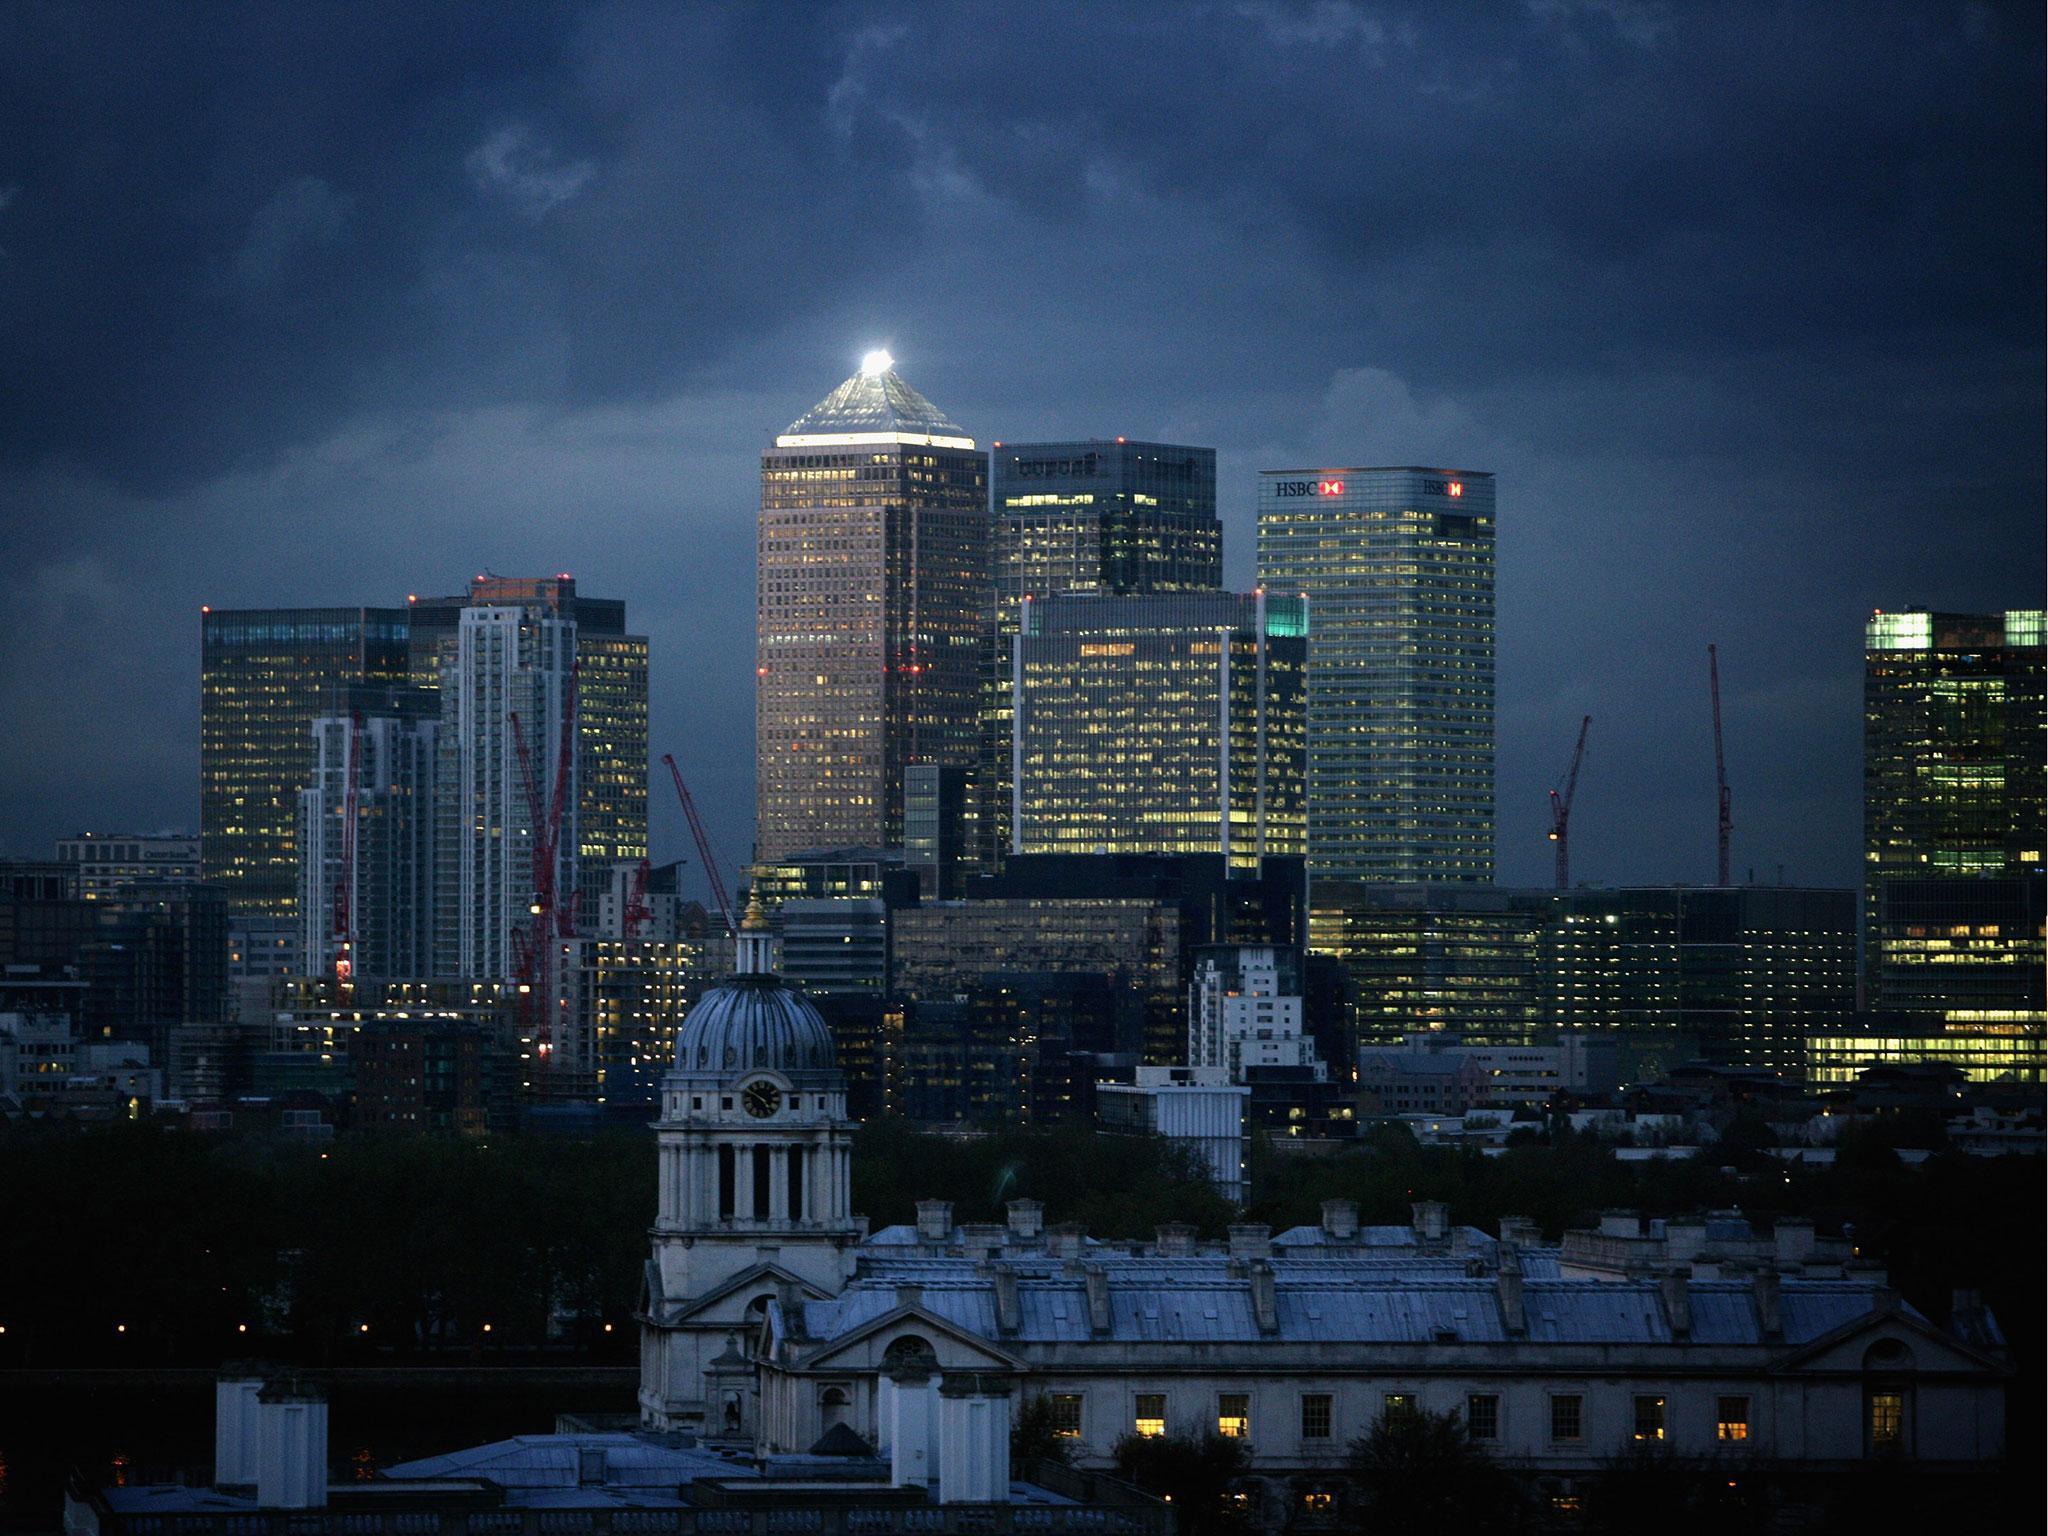 Clouds gather over high-rise buildings in Canary Wharf